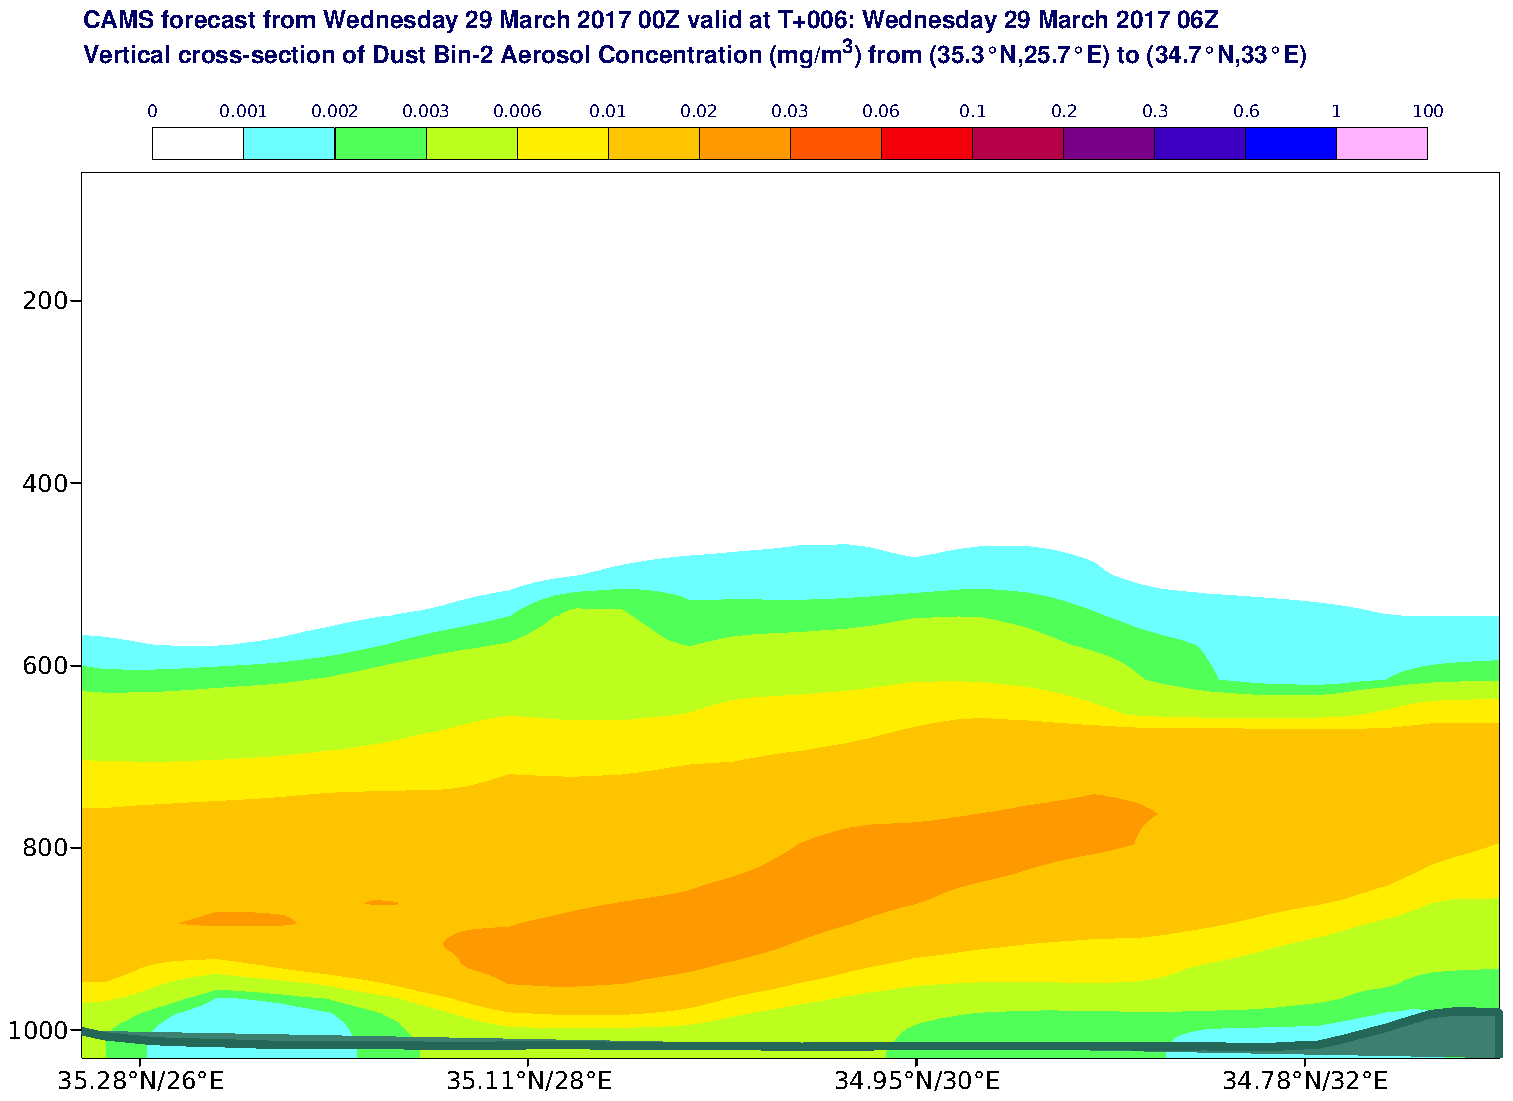 Vertical cross-section of Dust Bin-2 Aerosol Concentration (mg/m3) valid at T6 - 2017-03-29 06:00